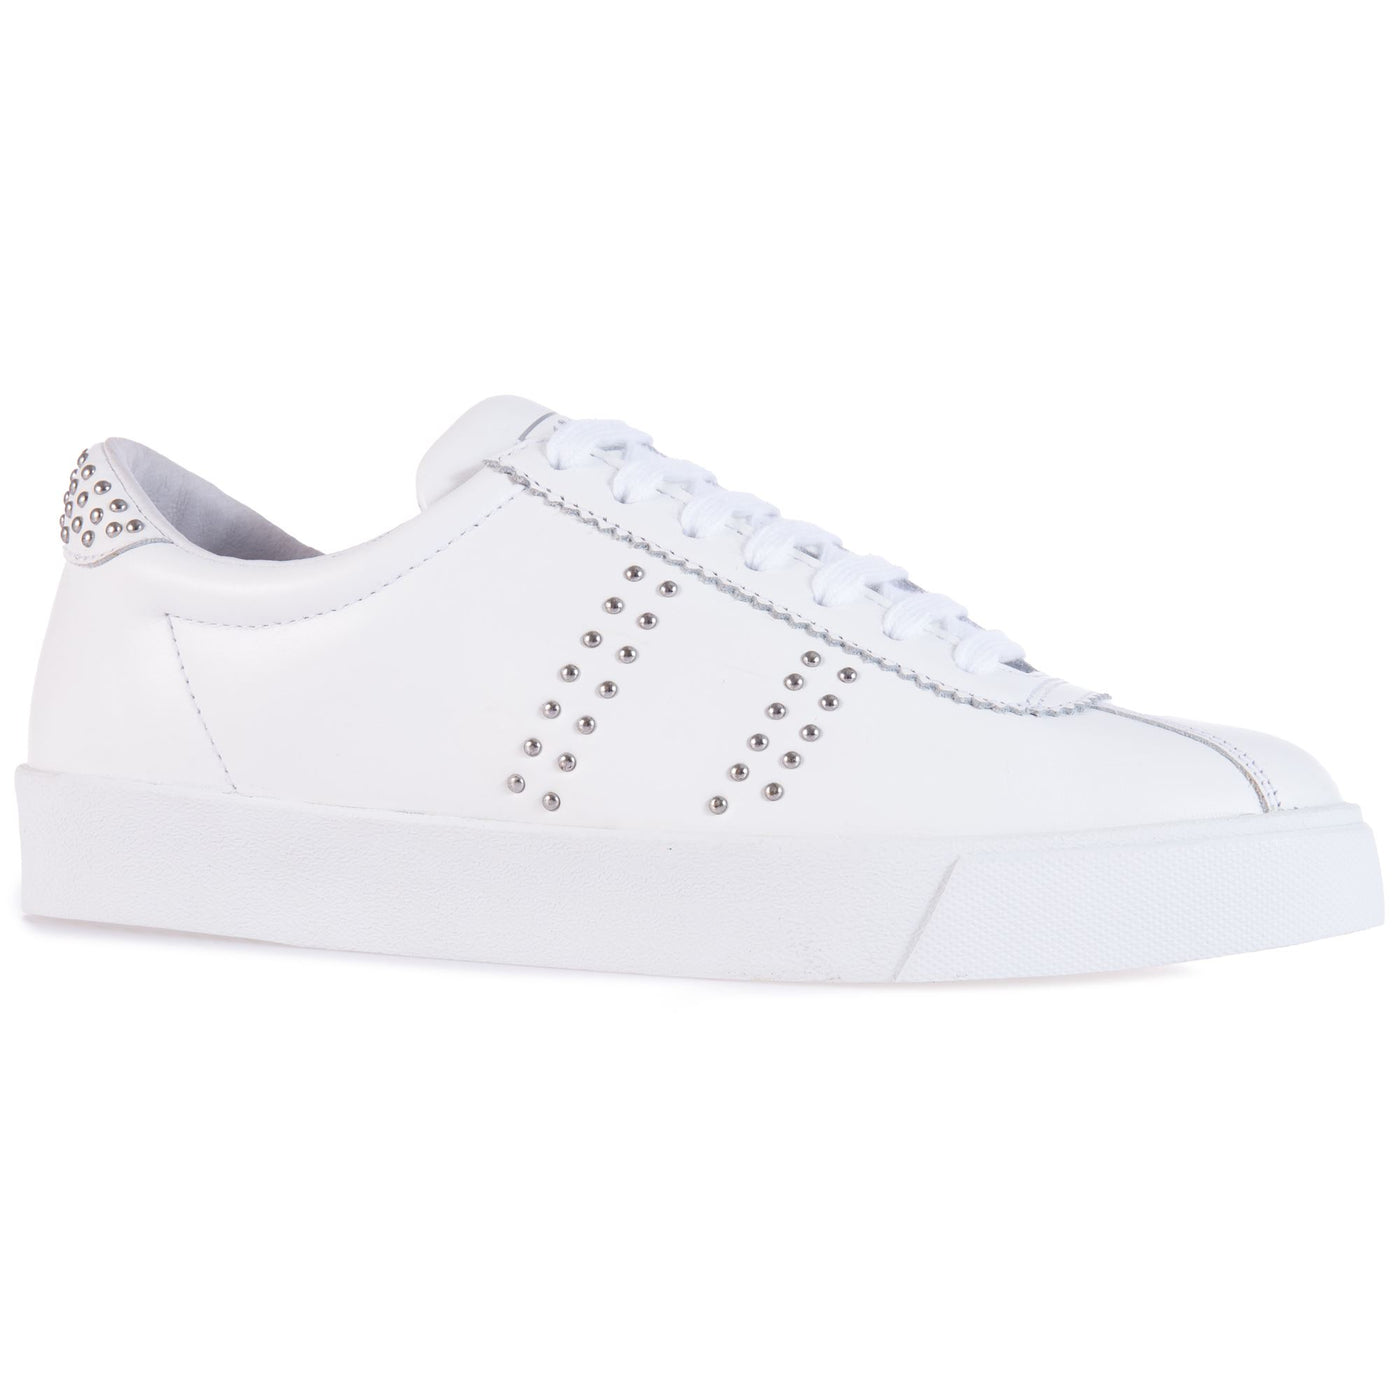 Sneakers Woman 2843 CLUB S STUDS Low Cut WHITE-SILVER Detail Double				